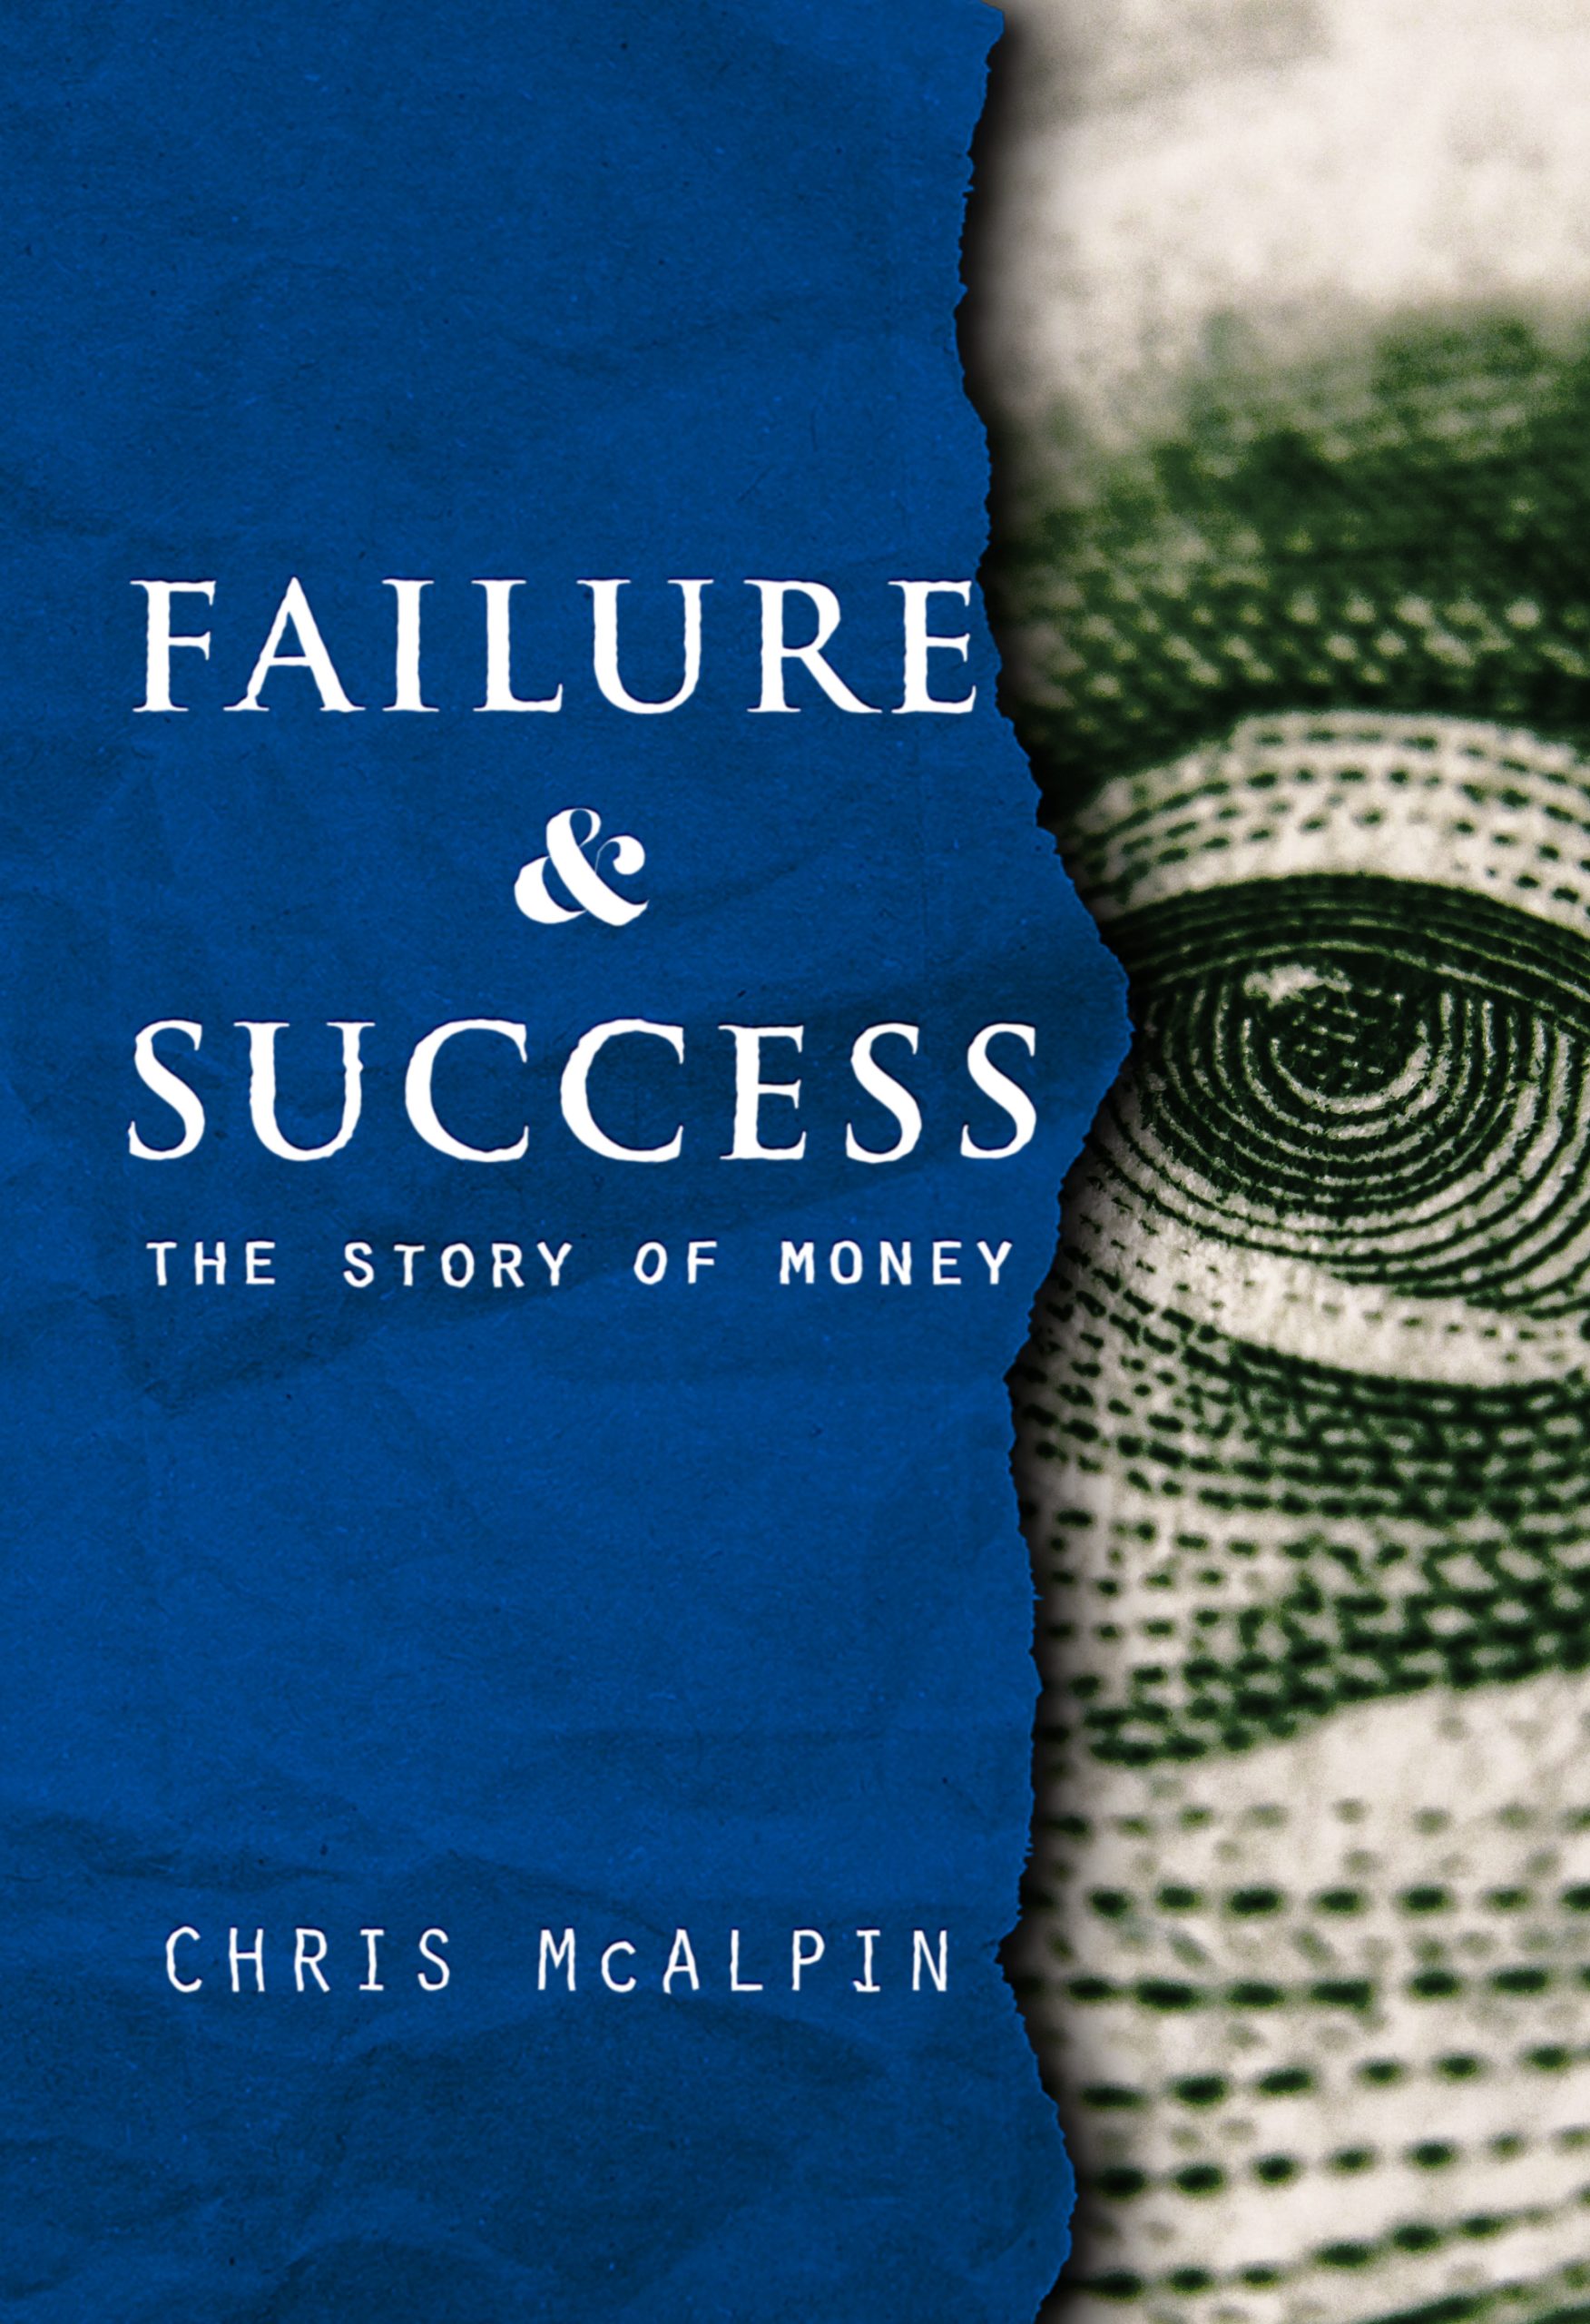 On the left side of the cover is a blue ripped and crumpled paper with the title Failure & Success in large letters near the center of the blue paper. Below that is the subtitle in smaller letters: The Story of Money. Toward the bottom of the blue paper is the author name: Chris McAlpin. On the right side is a glimpse of a close-up of Benjamin Franklin's face from a $100 bill. The blue paper looks like it's on top of the money.